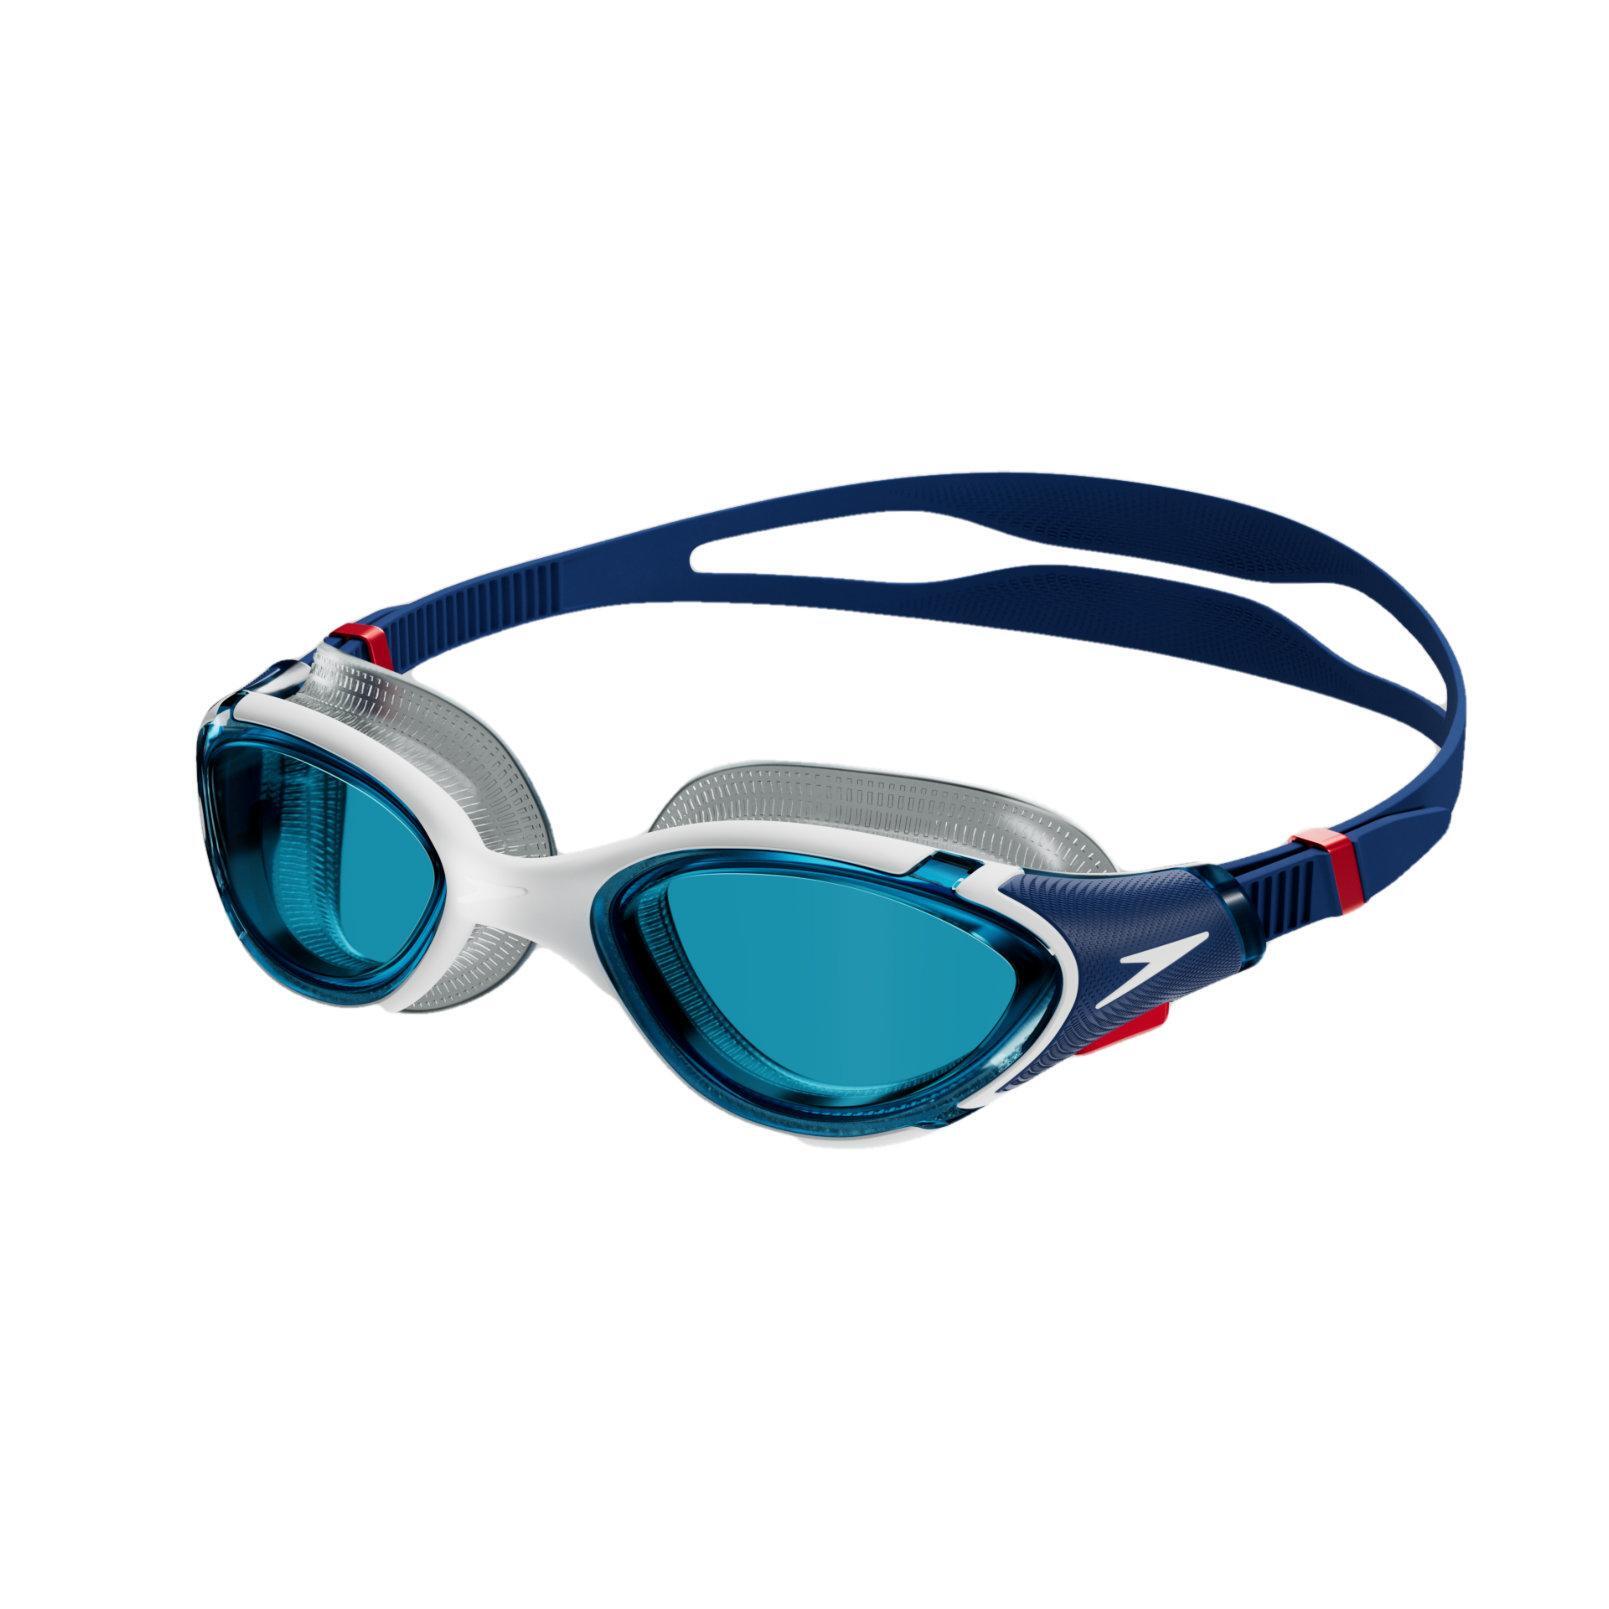 Mens Biofuse Swimming Goggles (Blue/White/Red) 1/1